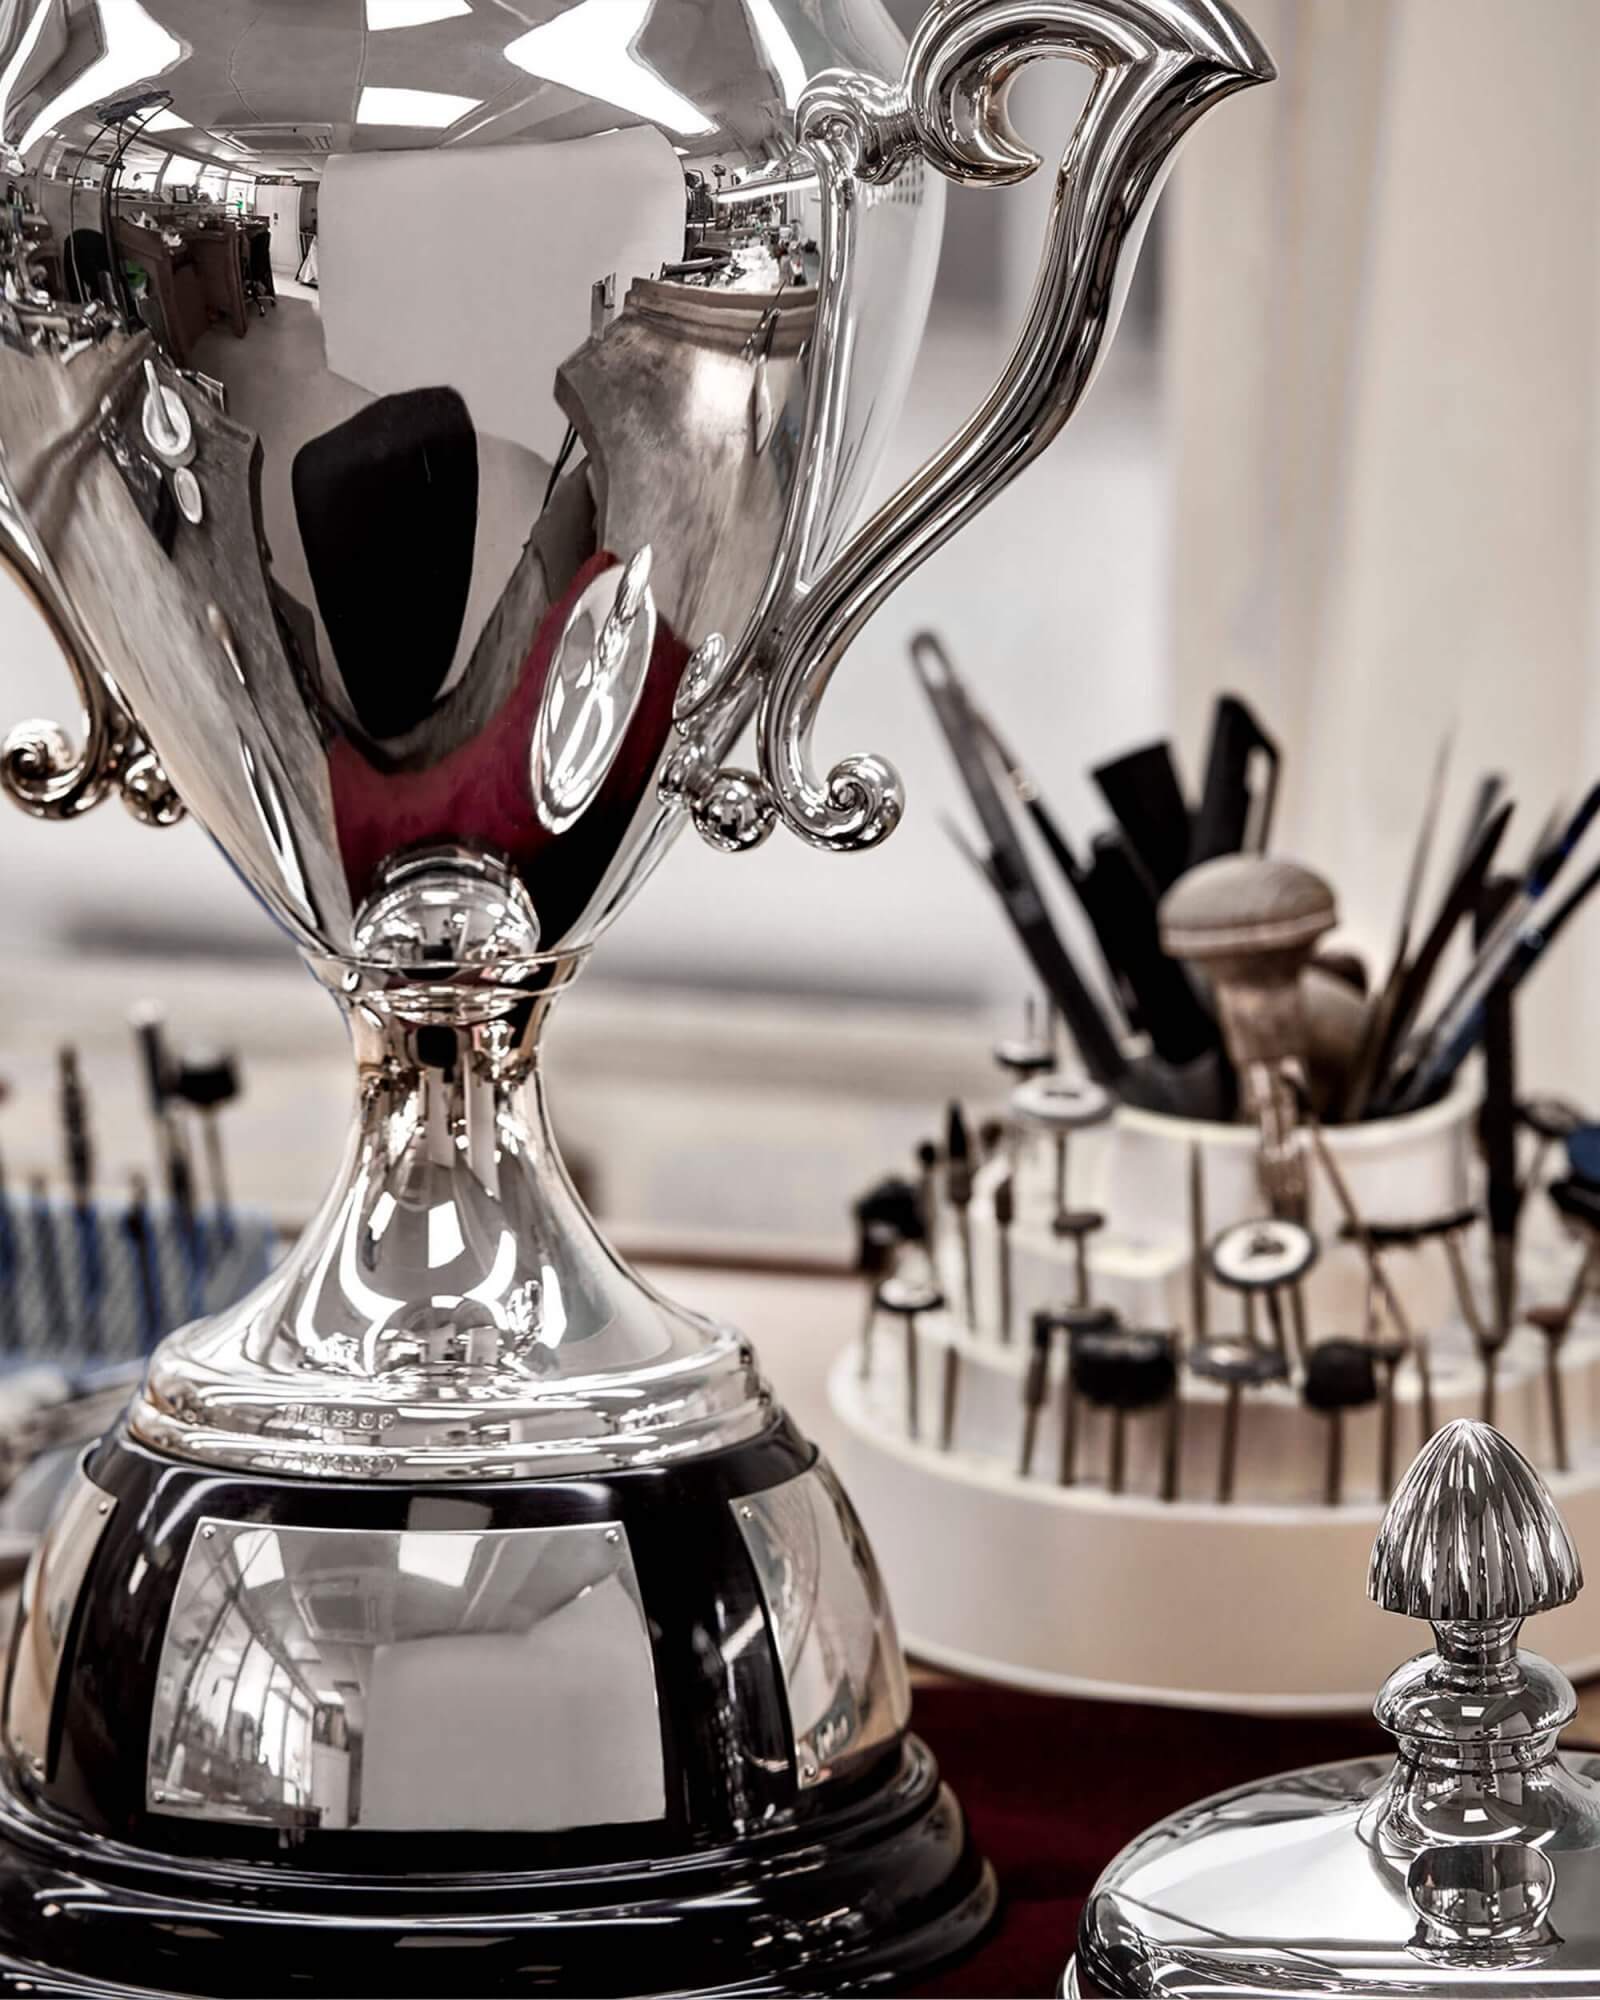 reflections of a workbench in a polished silver Garrard sporting trophy